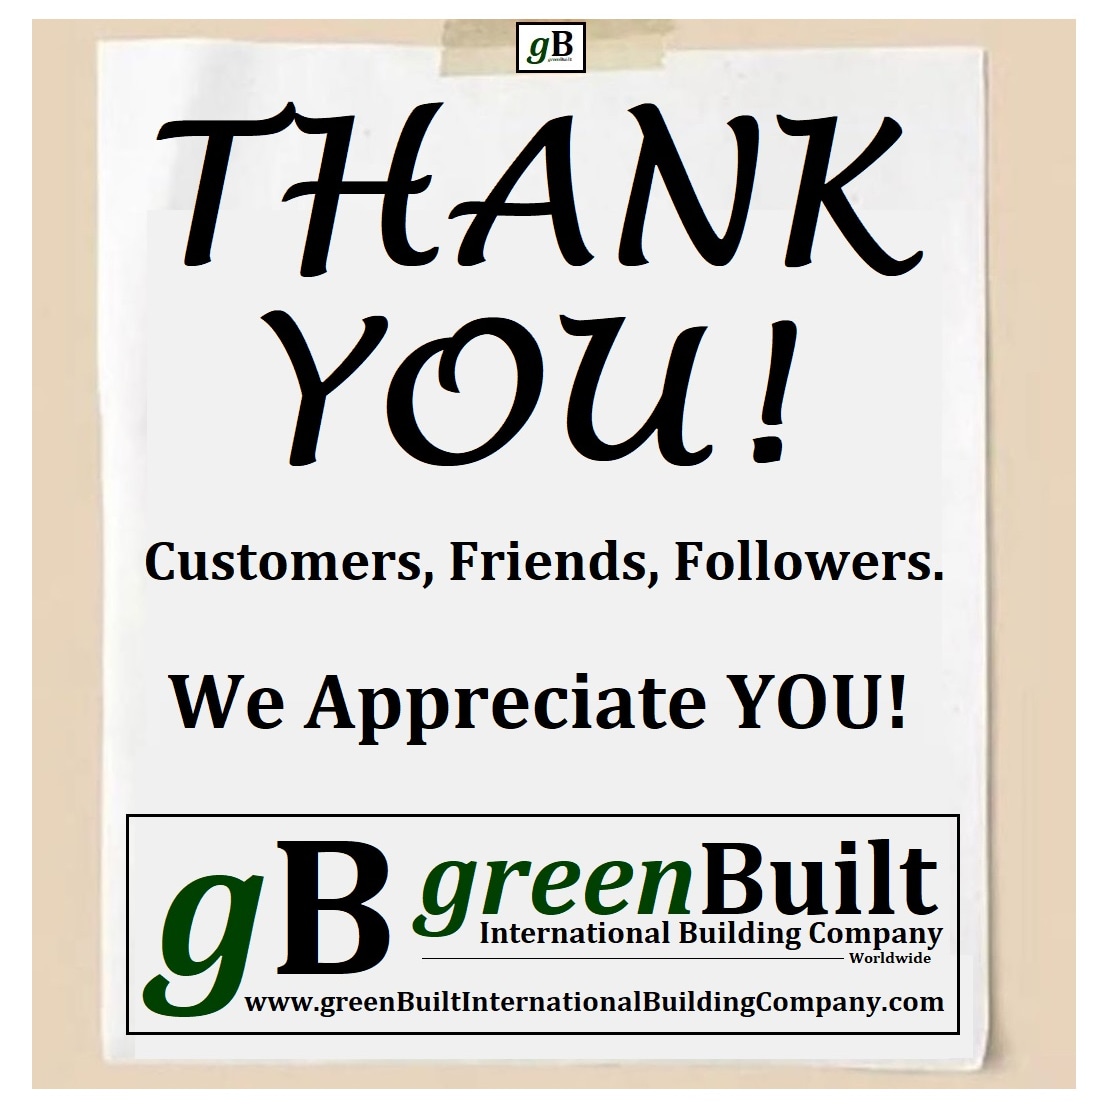 #THANKYOU!
#Customers
#Friends
@Followers

YOU are the GREATEST!
We appreciate YOU!

Have a GREAT Day!

Learn more about our #ZeroCarbon #Green #Sustainable CAFboard #BuildingProducts.

Visit us at: …builtinternationalbuildingcompany.com
#Like #Repost #Friend #Following #Follow #Follower